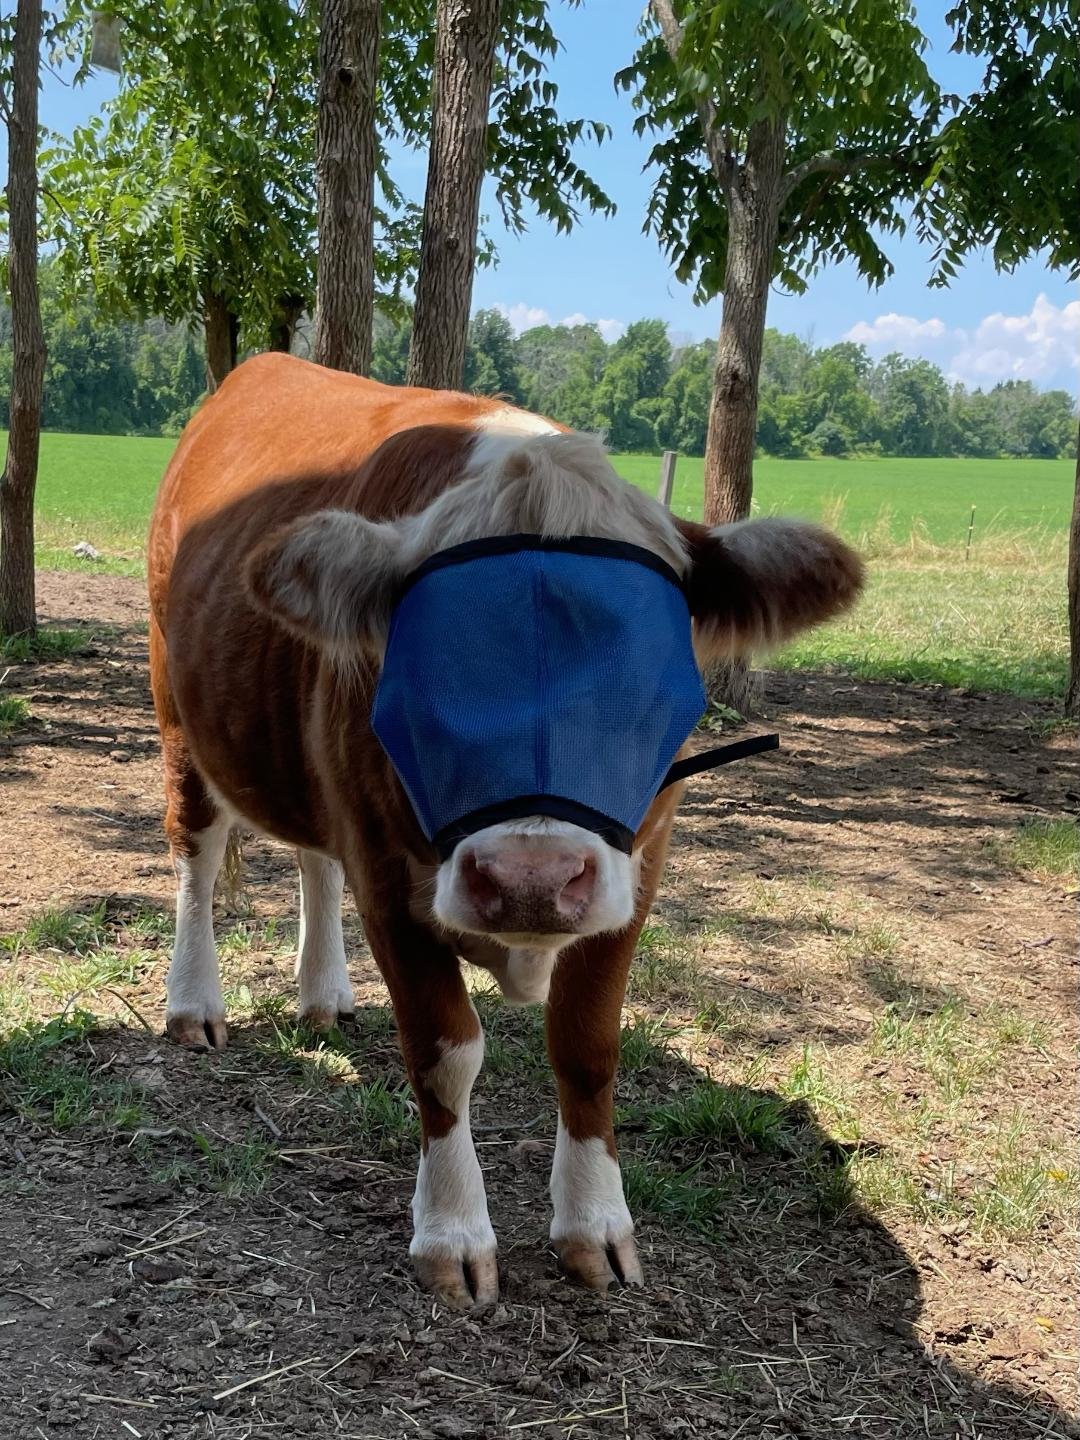 UV Mesh Cow Fly Masks Medium and Large Sizes, Cattle Supplies, Farm Livestock Supply